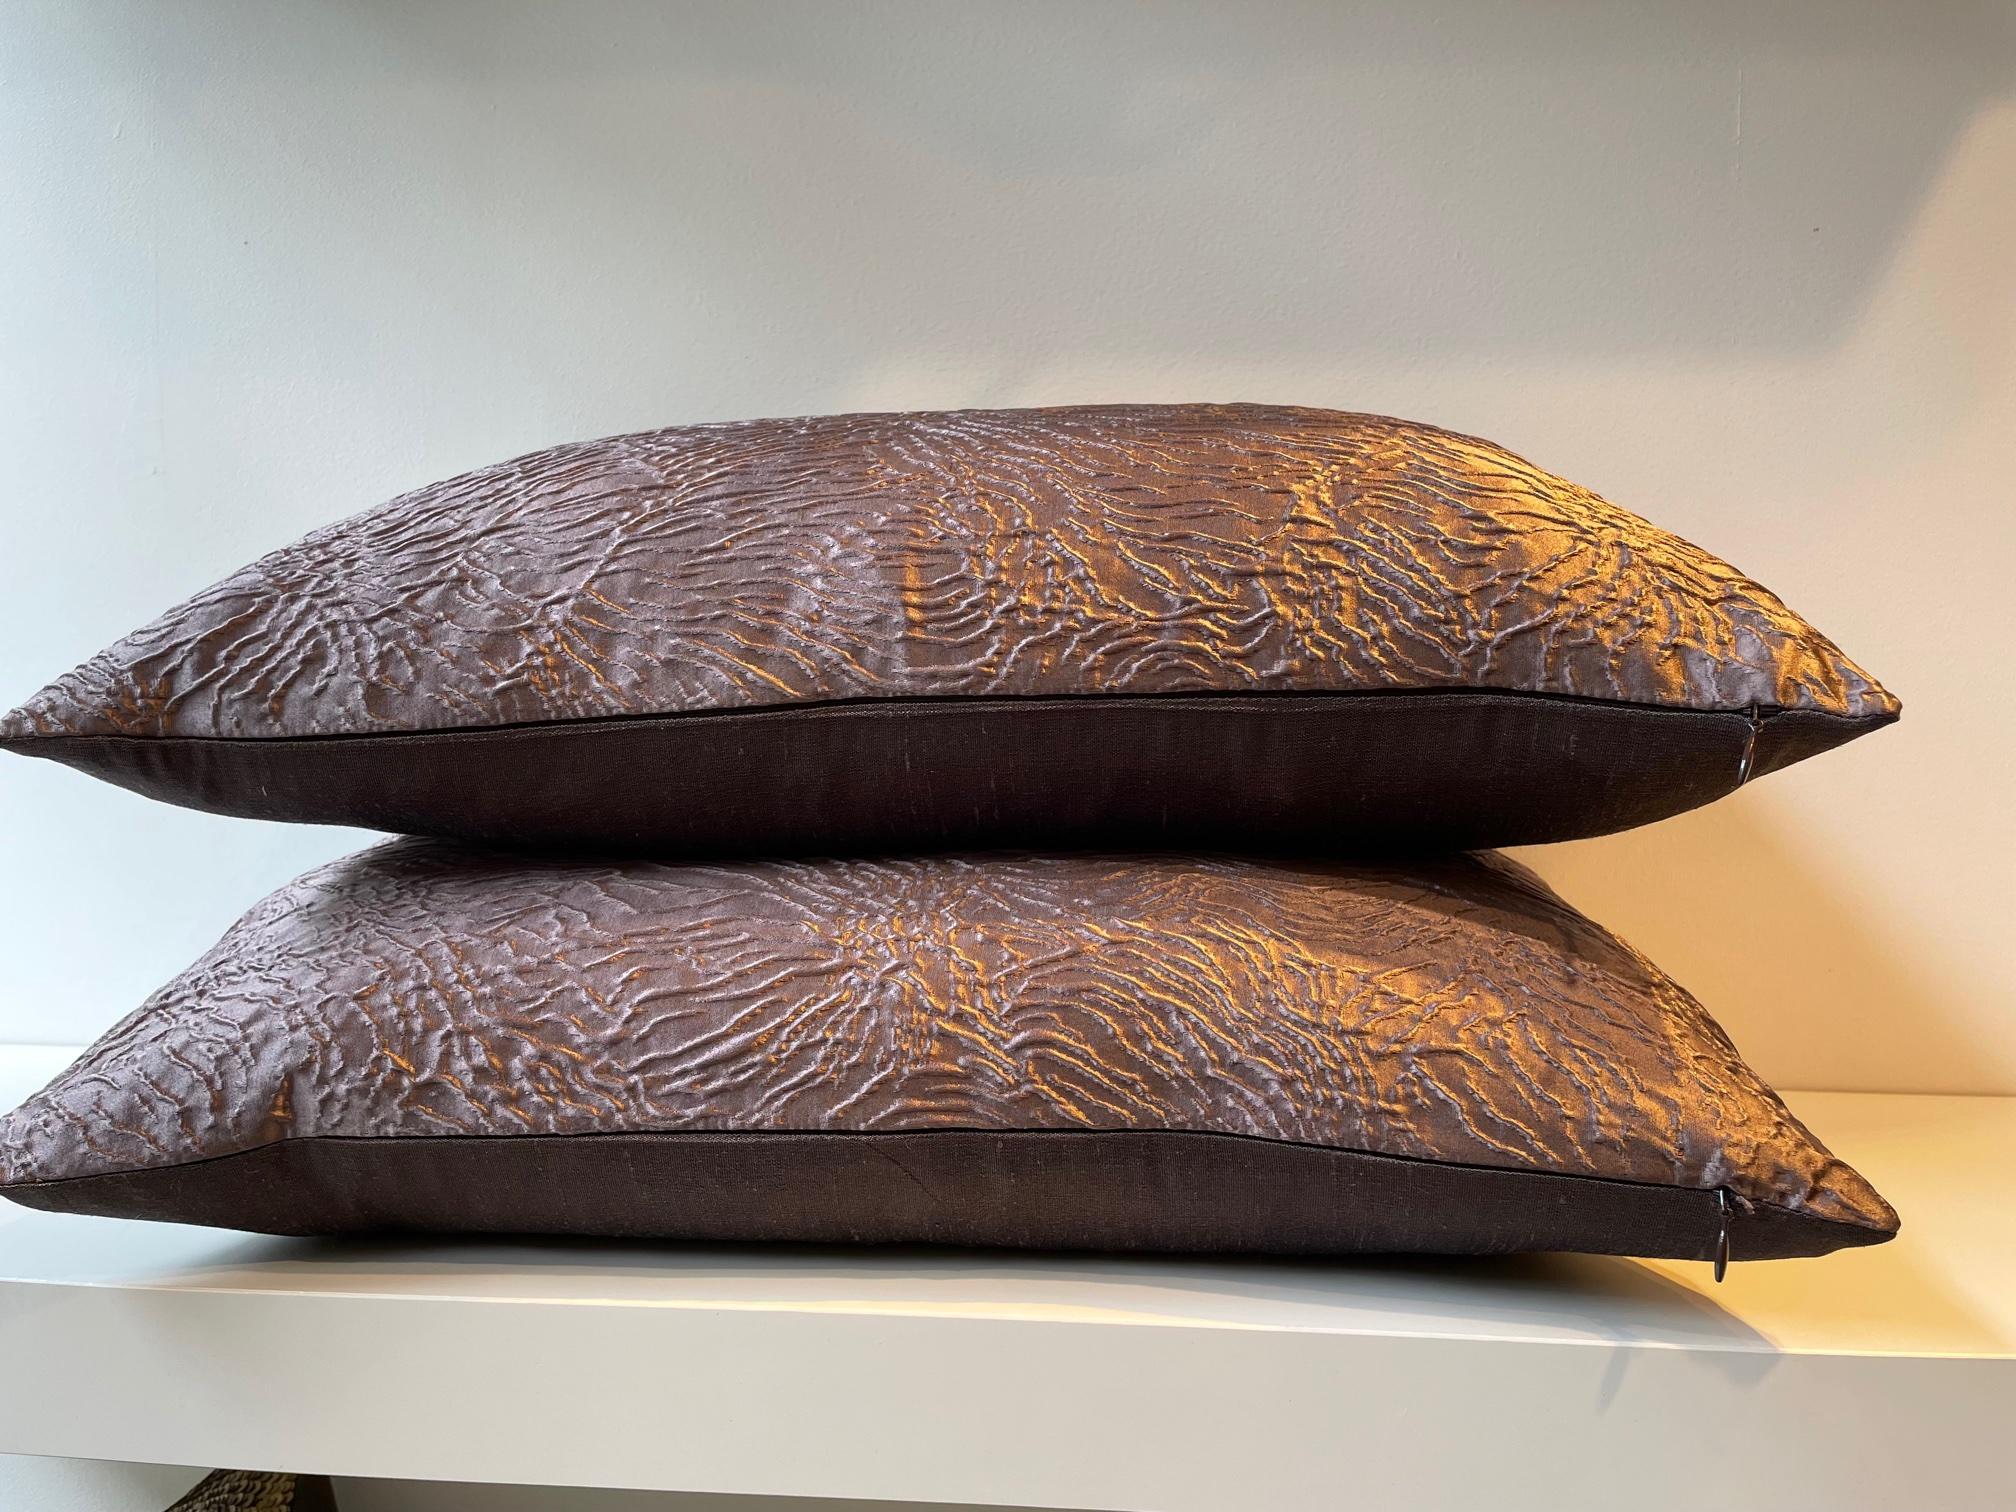 Pair of Silk Cushions Embossed Floral Design Color Heather at the Front, Plain Hand Woven Silk Color Dark Purple at the Back, Concealed Zip in the Bottom Seam,
Size 30 x 48cm
Inner Pad With New Feathers